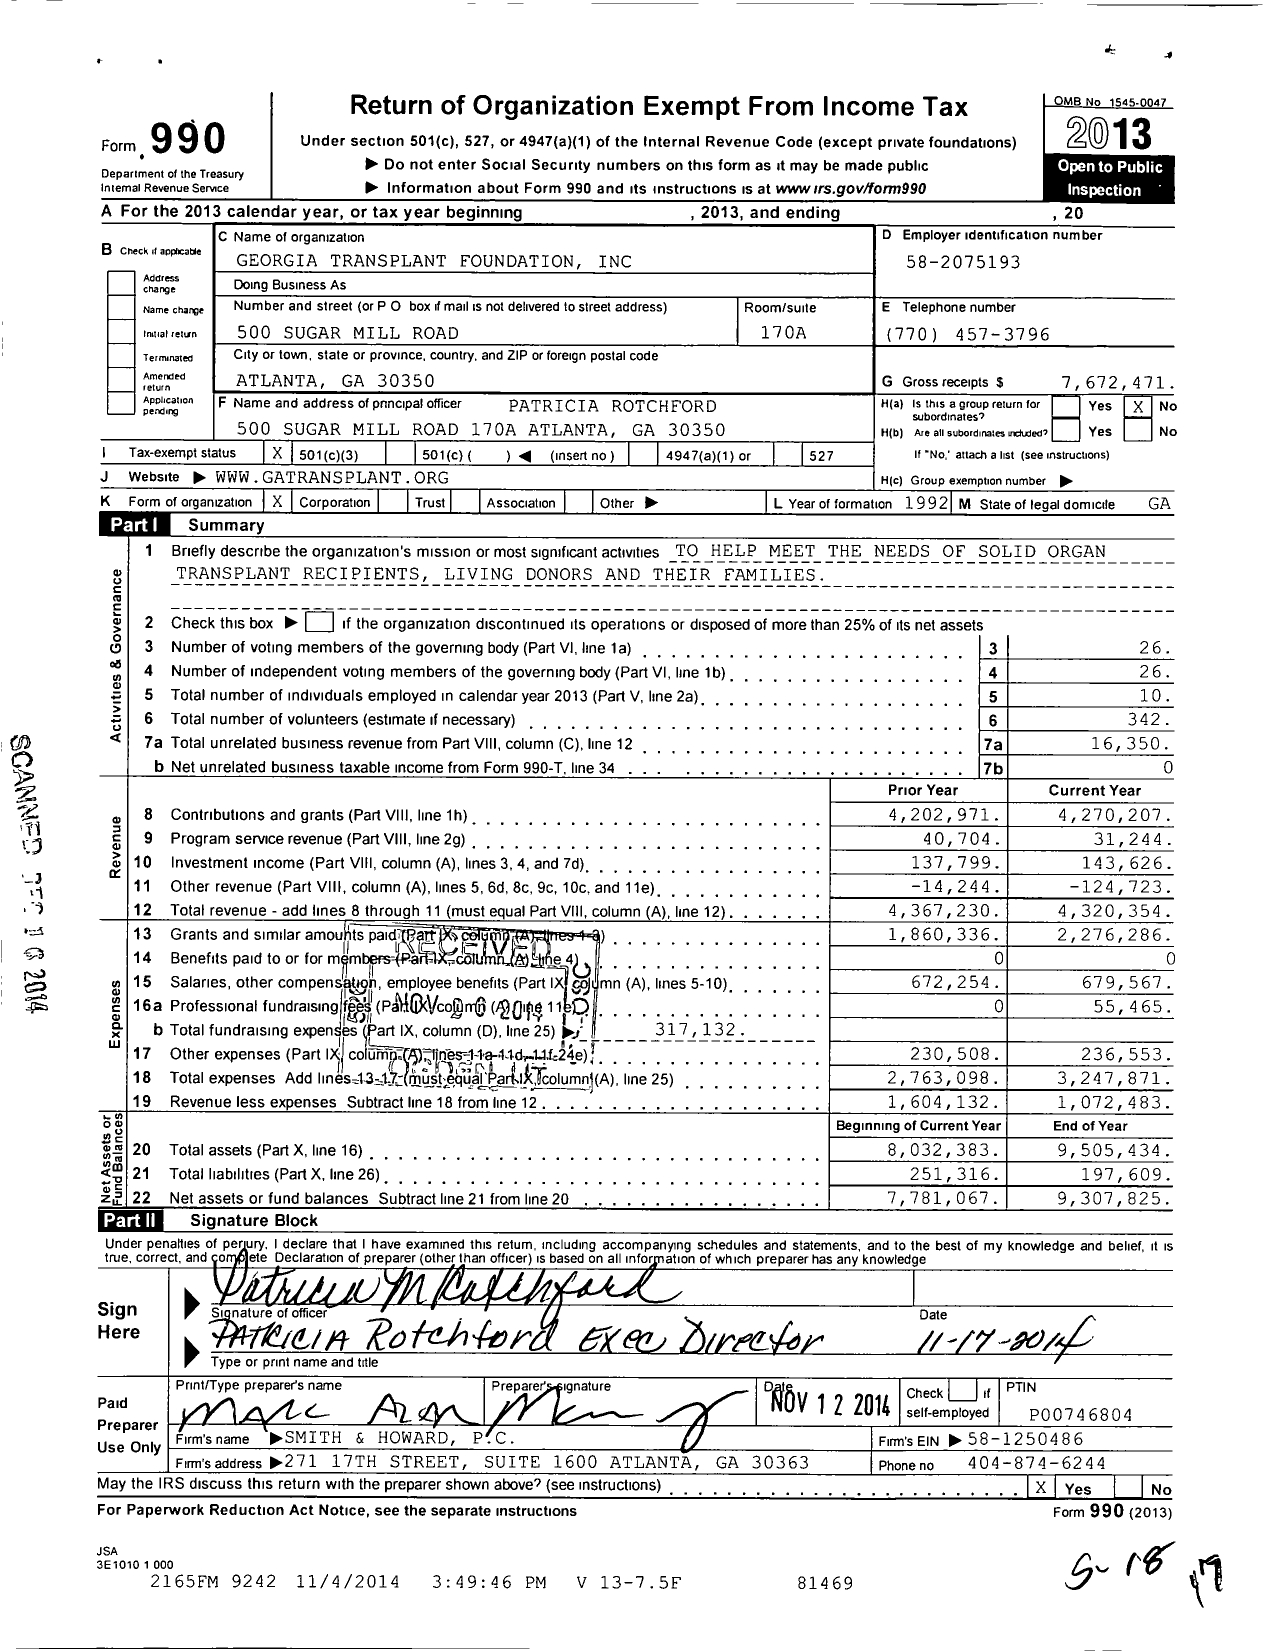 Image of first page of 2013 Form 990 for Georgia Transplant Foundation